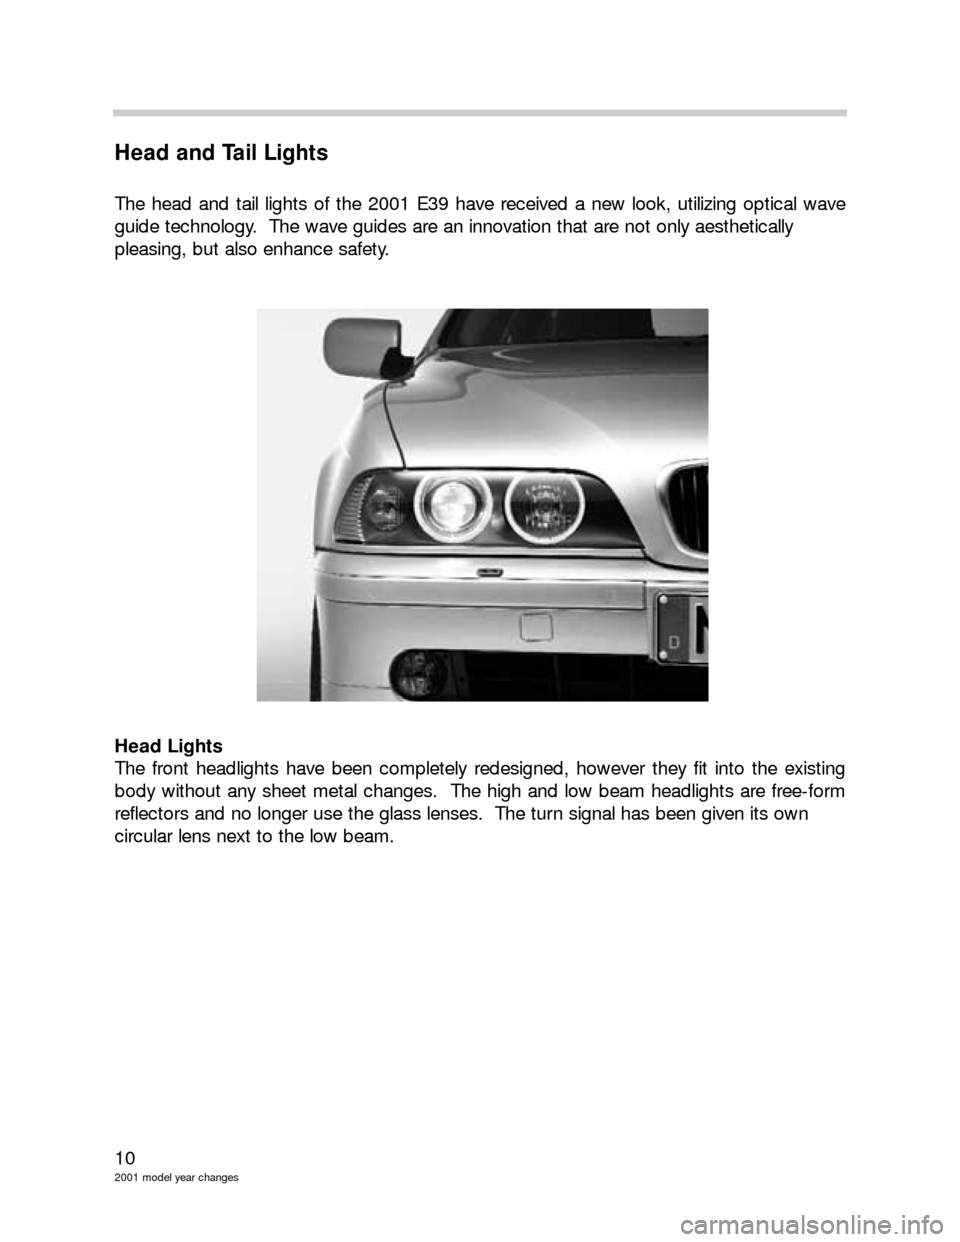 BMW 3 SERIES 2003 E46 Model Yar Changes 10
2001 model year changes
Head and Tail Lights
The head and tail lights of the 2001 E39 have received a new look, utilizing optical wave
guide technology.  The wave guides are an innovation that are 